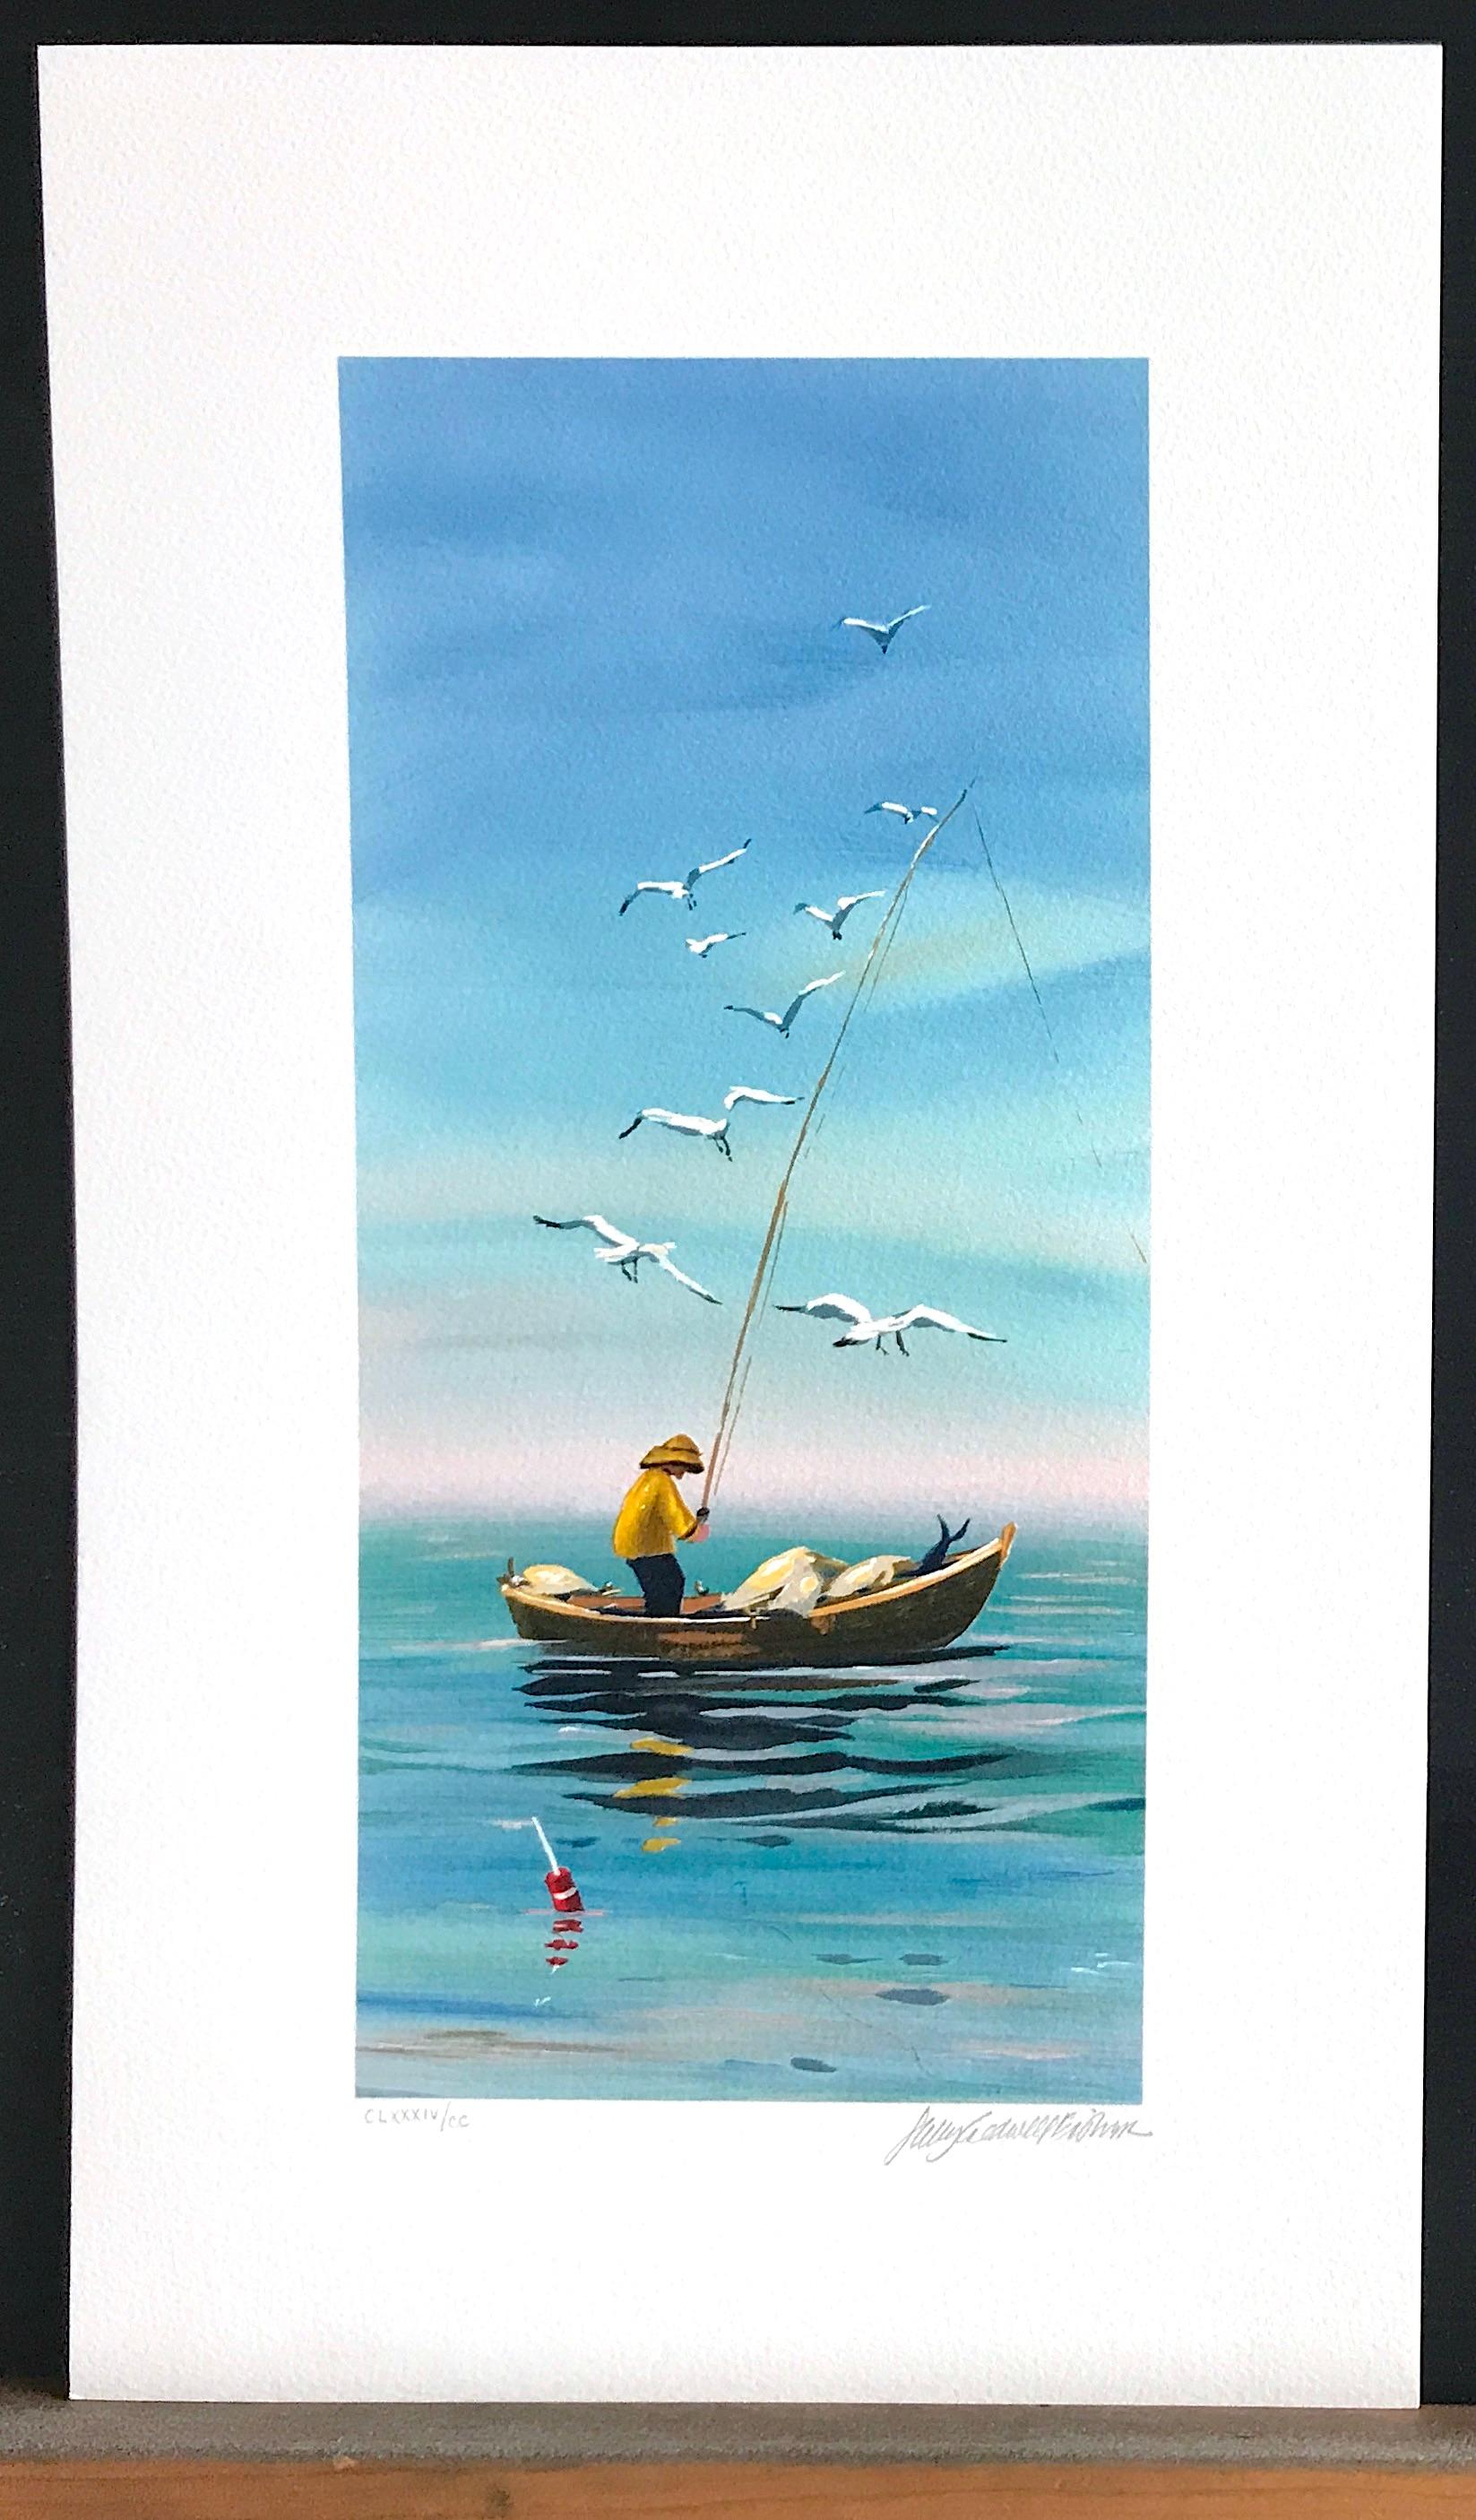 EARLY CATCH Signed Lithograph, New England Fisherman, Small Boat Print, Seagulls - Black Landscape Print by Sally Caldwell-Fisher